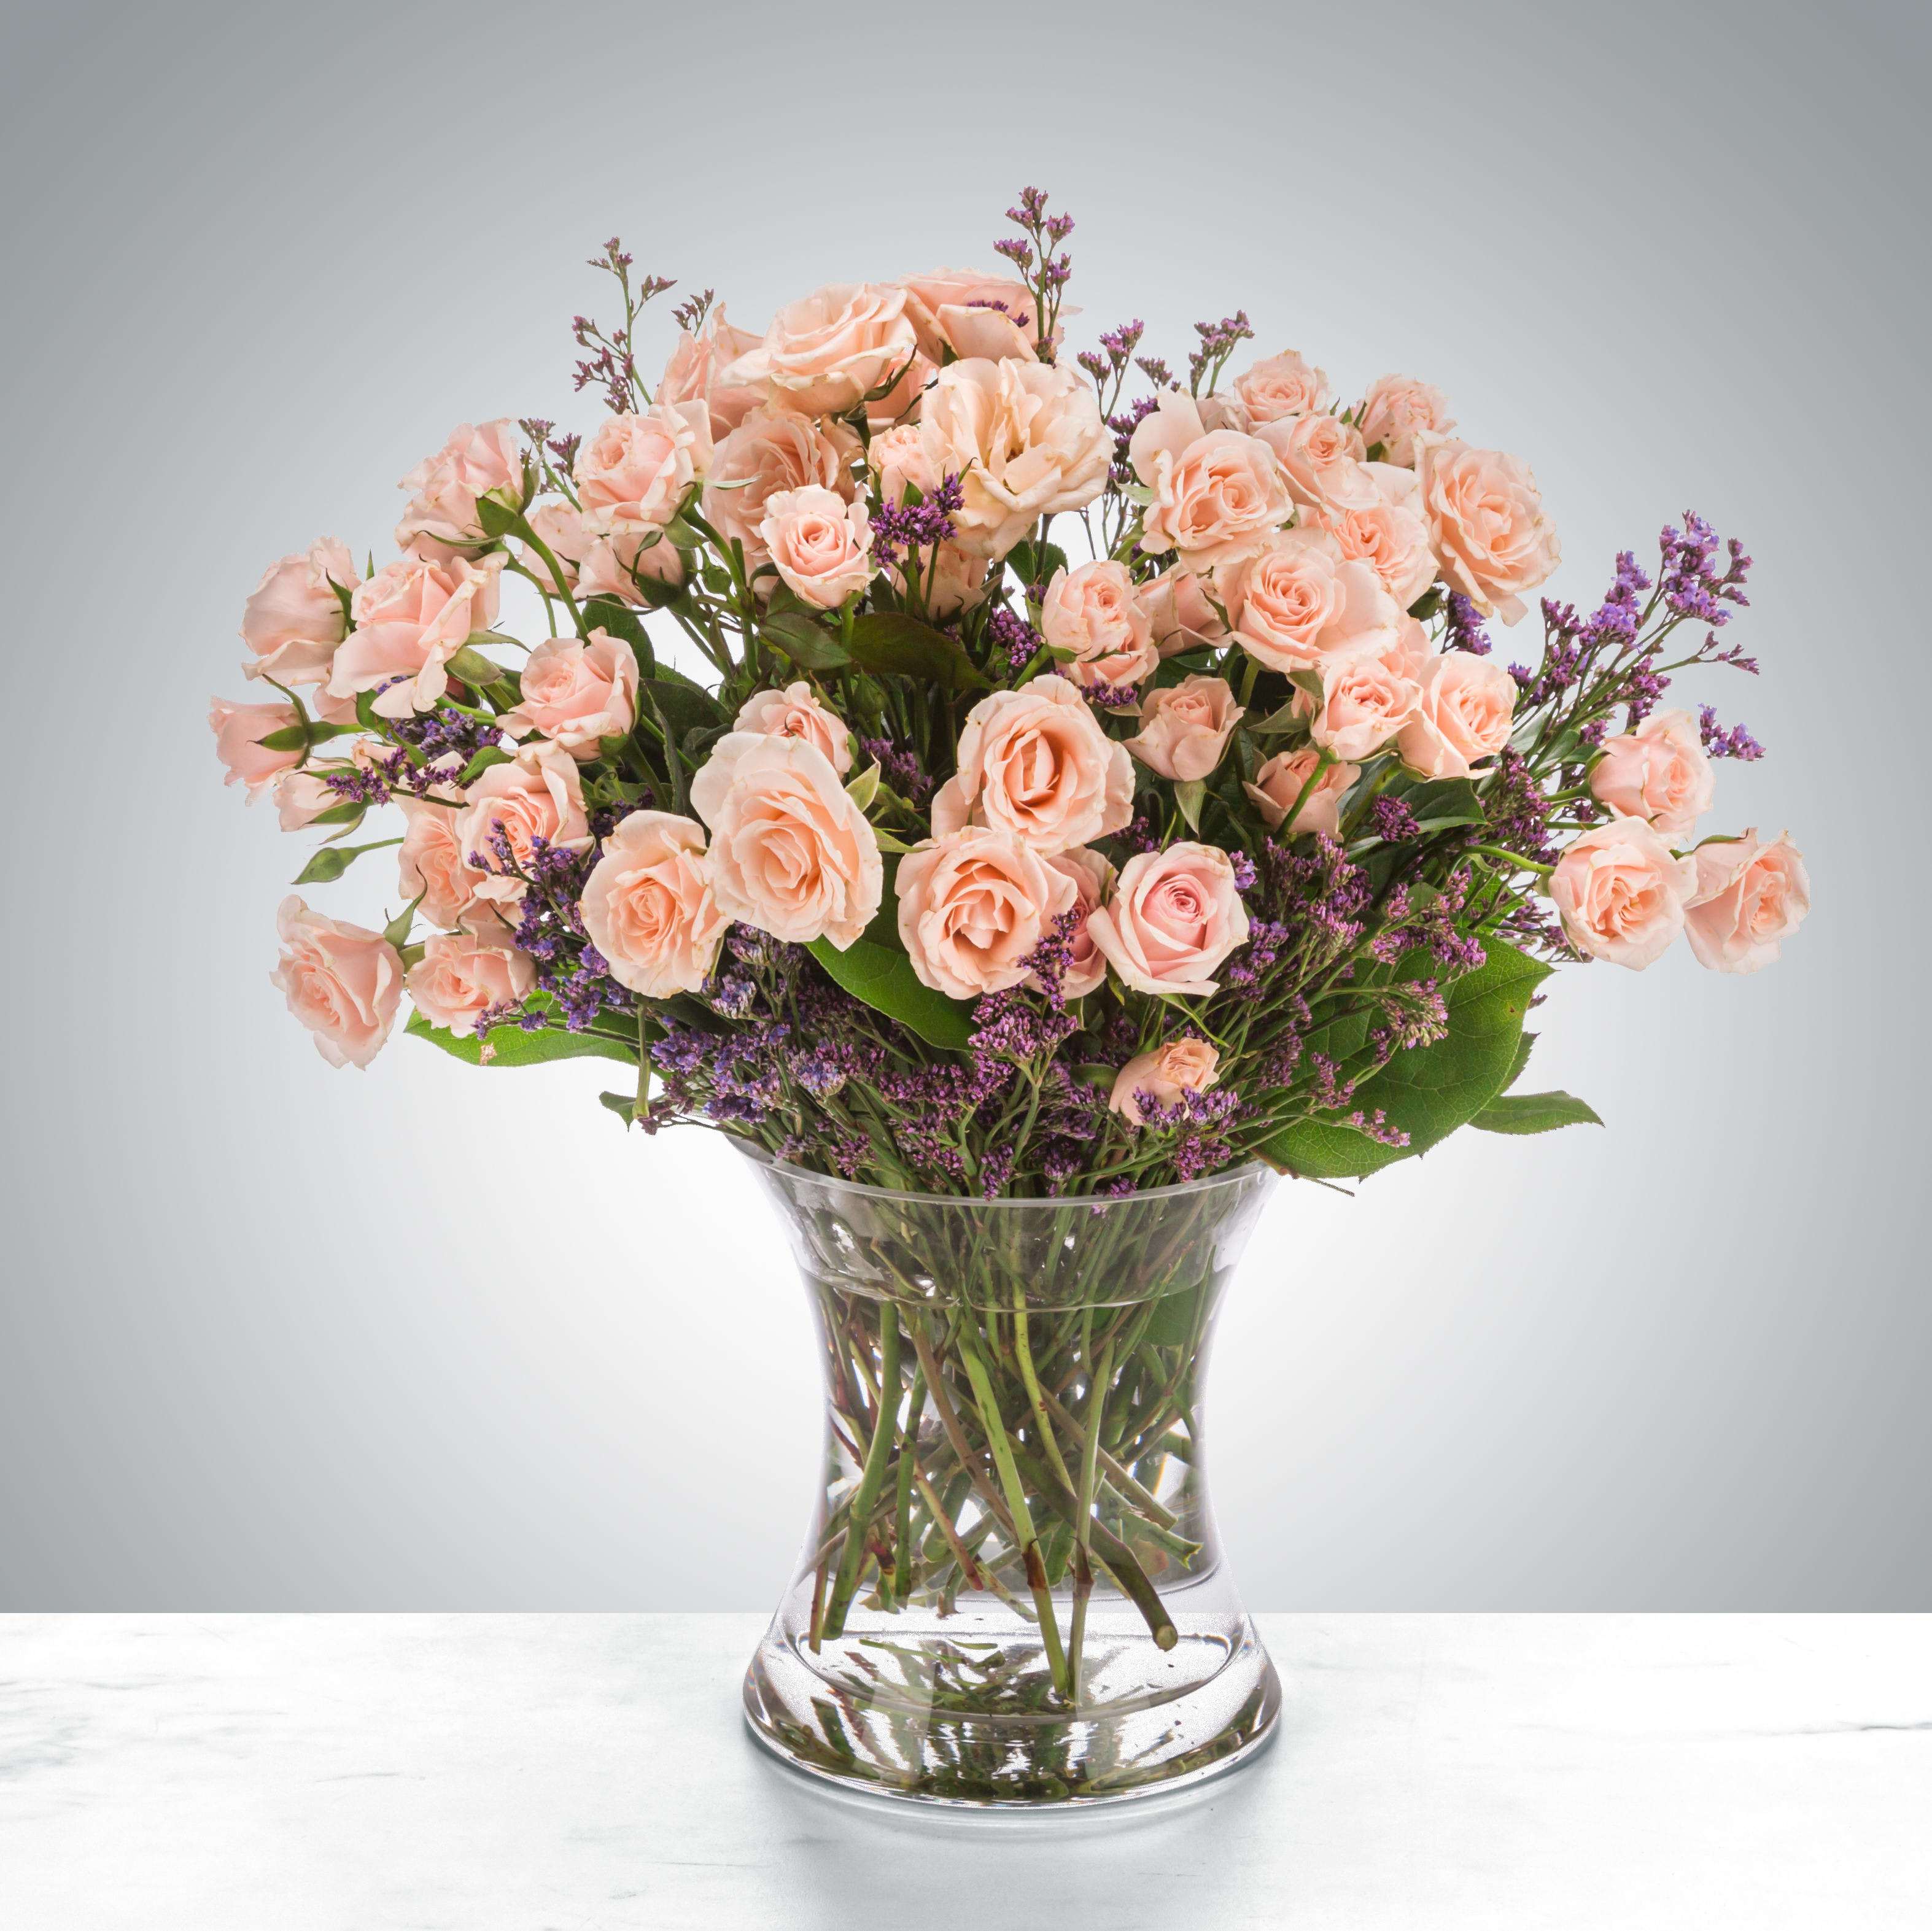 Rose Gold - A chic twist on sending somebody the classic dozen, spray roses are a great way to say you care in a lot of ways. Send blush spray roses for Breast Cancer Awareness Month, International Women's Day, or just because.  1st Image: Standard 2nd Image: Premium